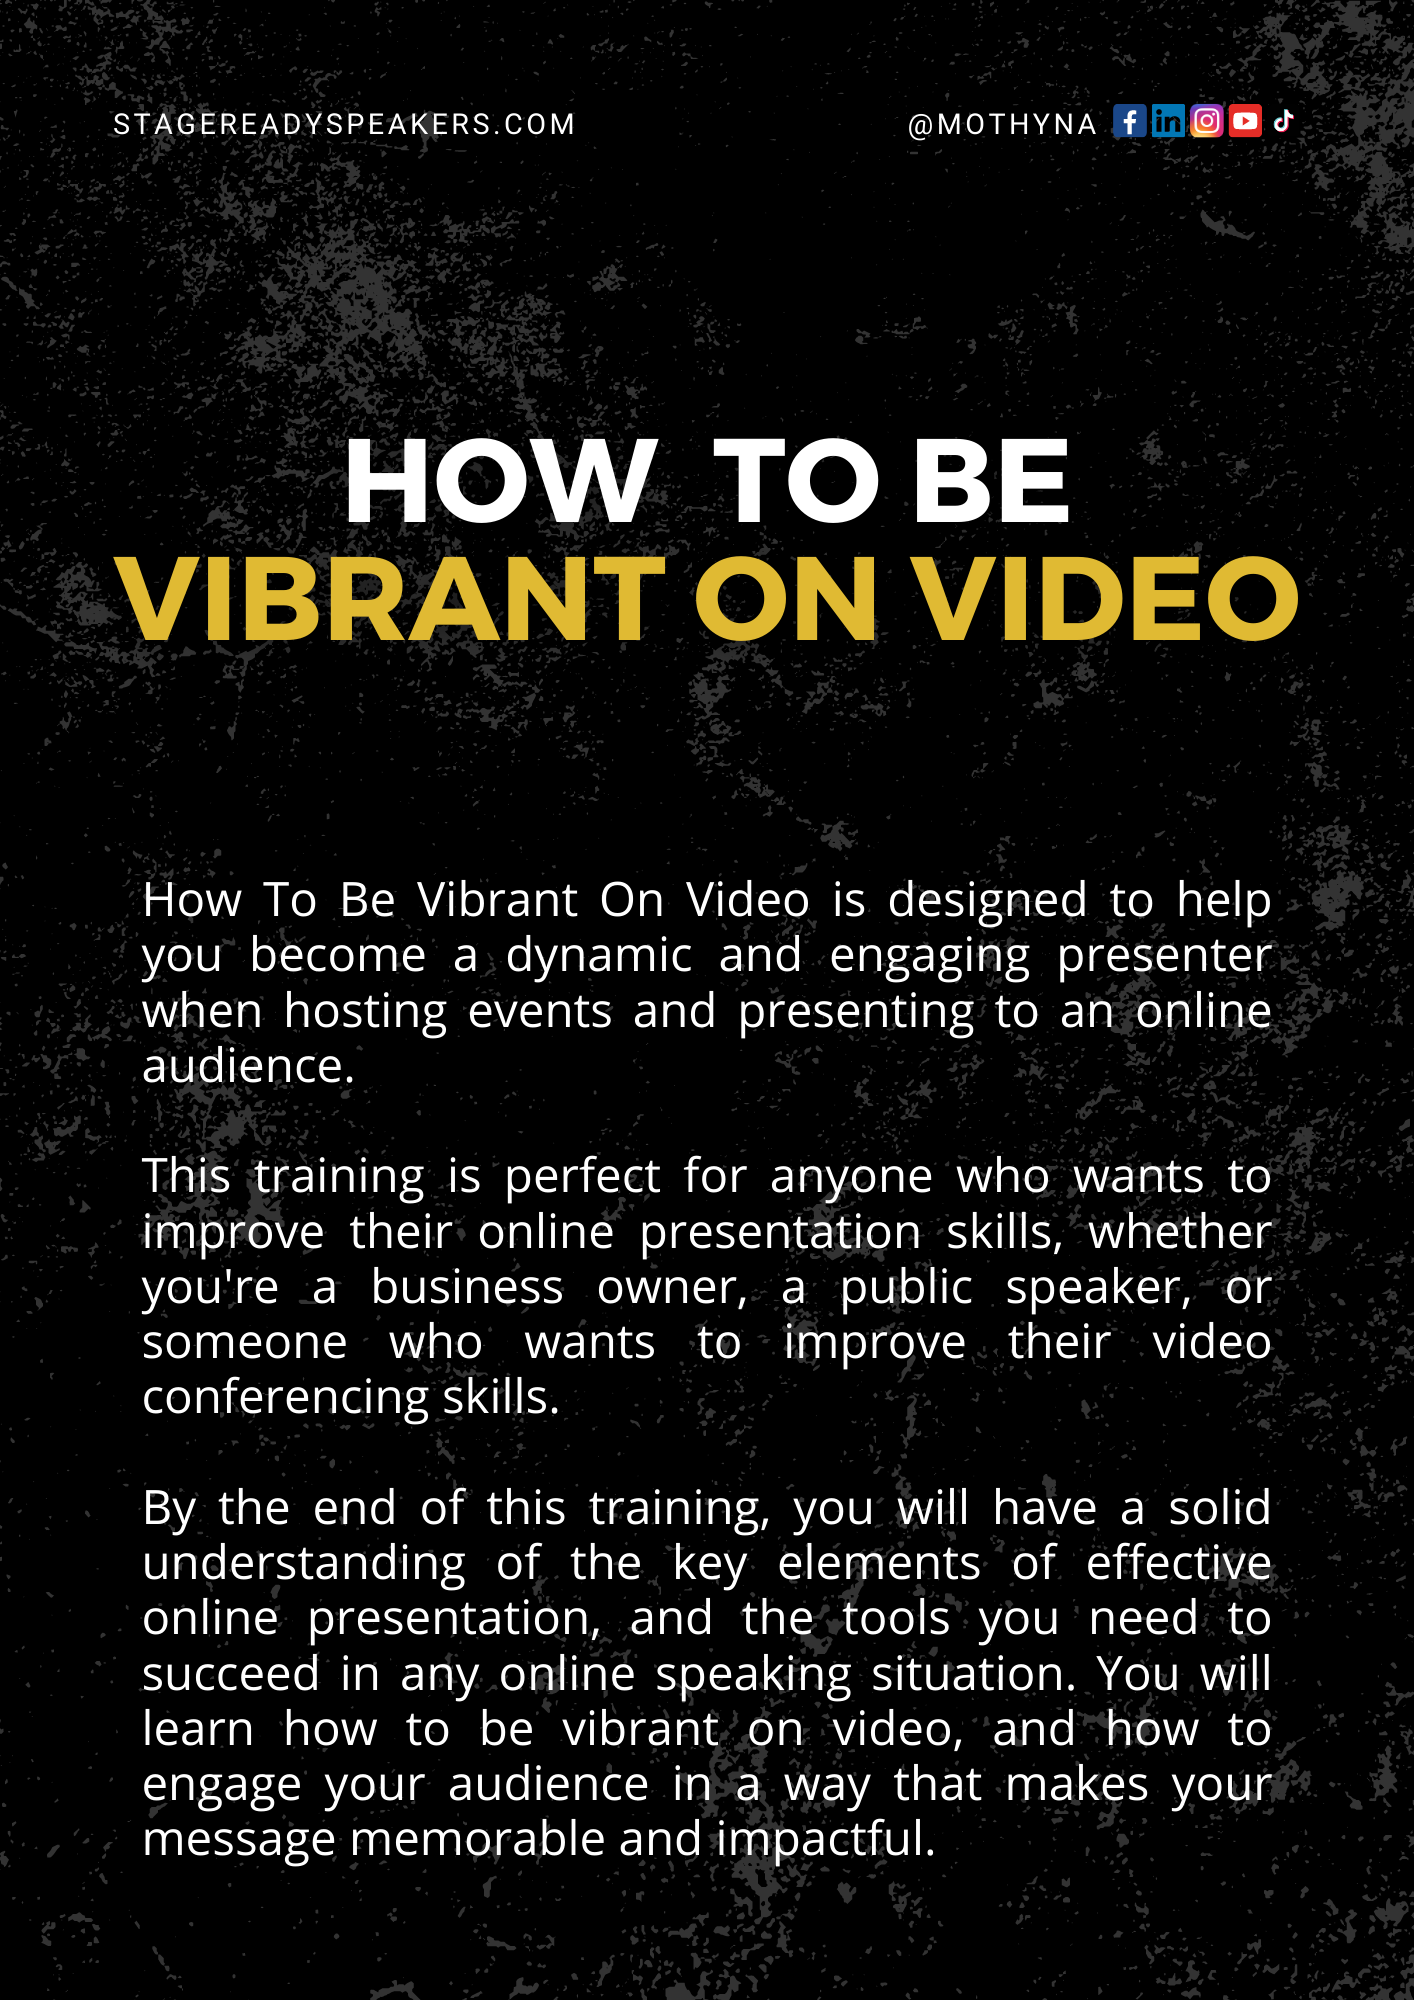 How To Be Vibrant On Video Training